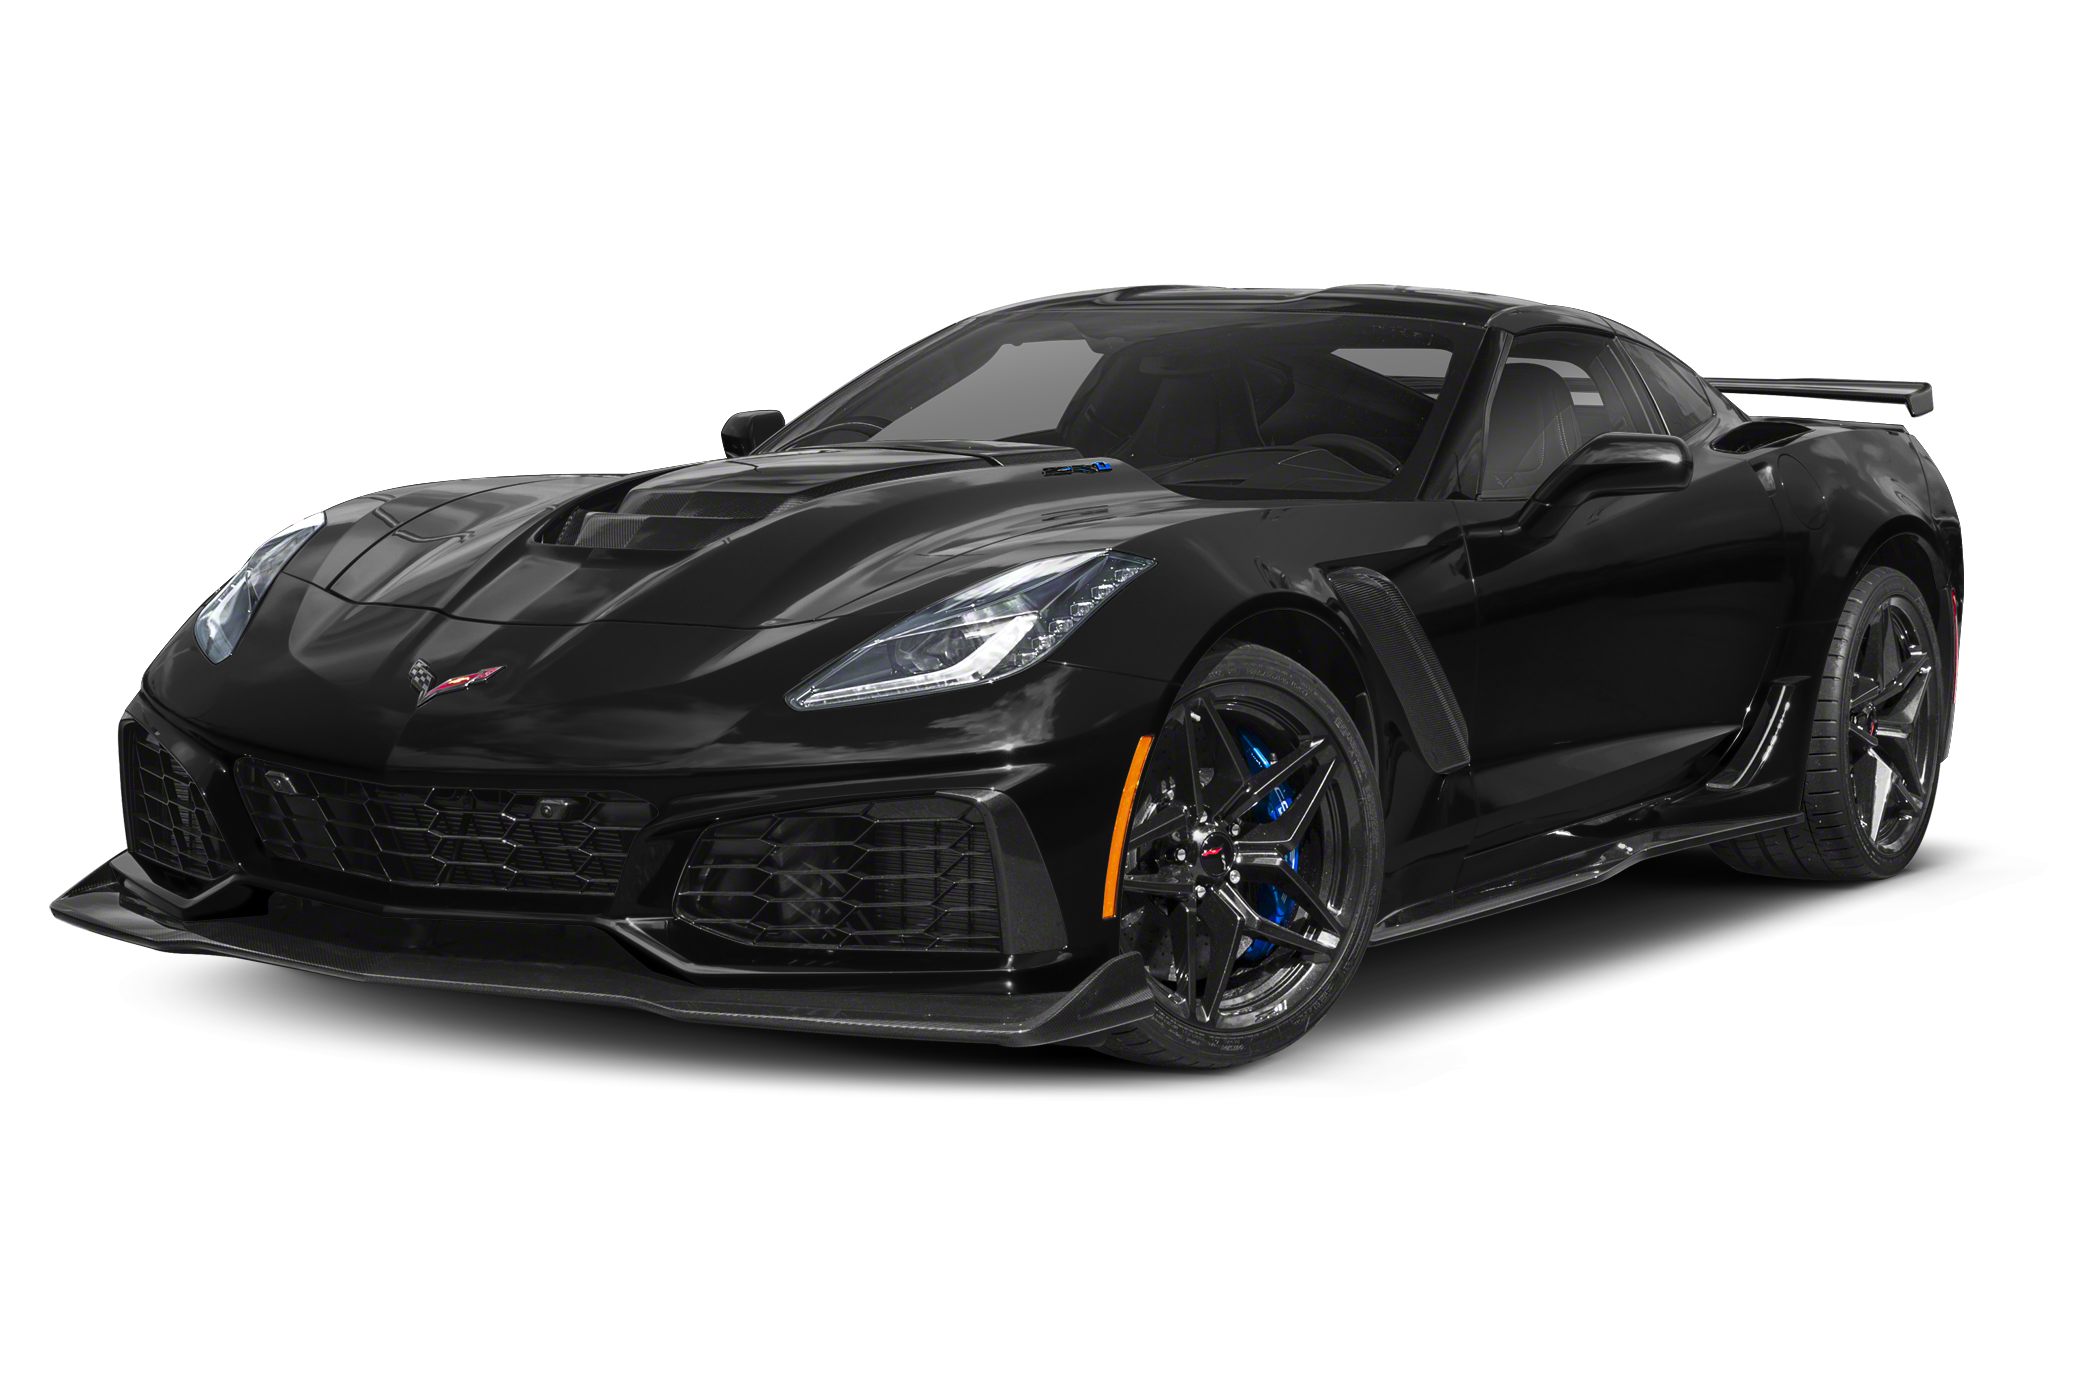 2019 Chevrolet Corvette Zr1 2dr Coupe Pricing And Options